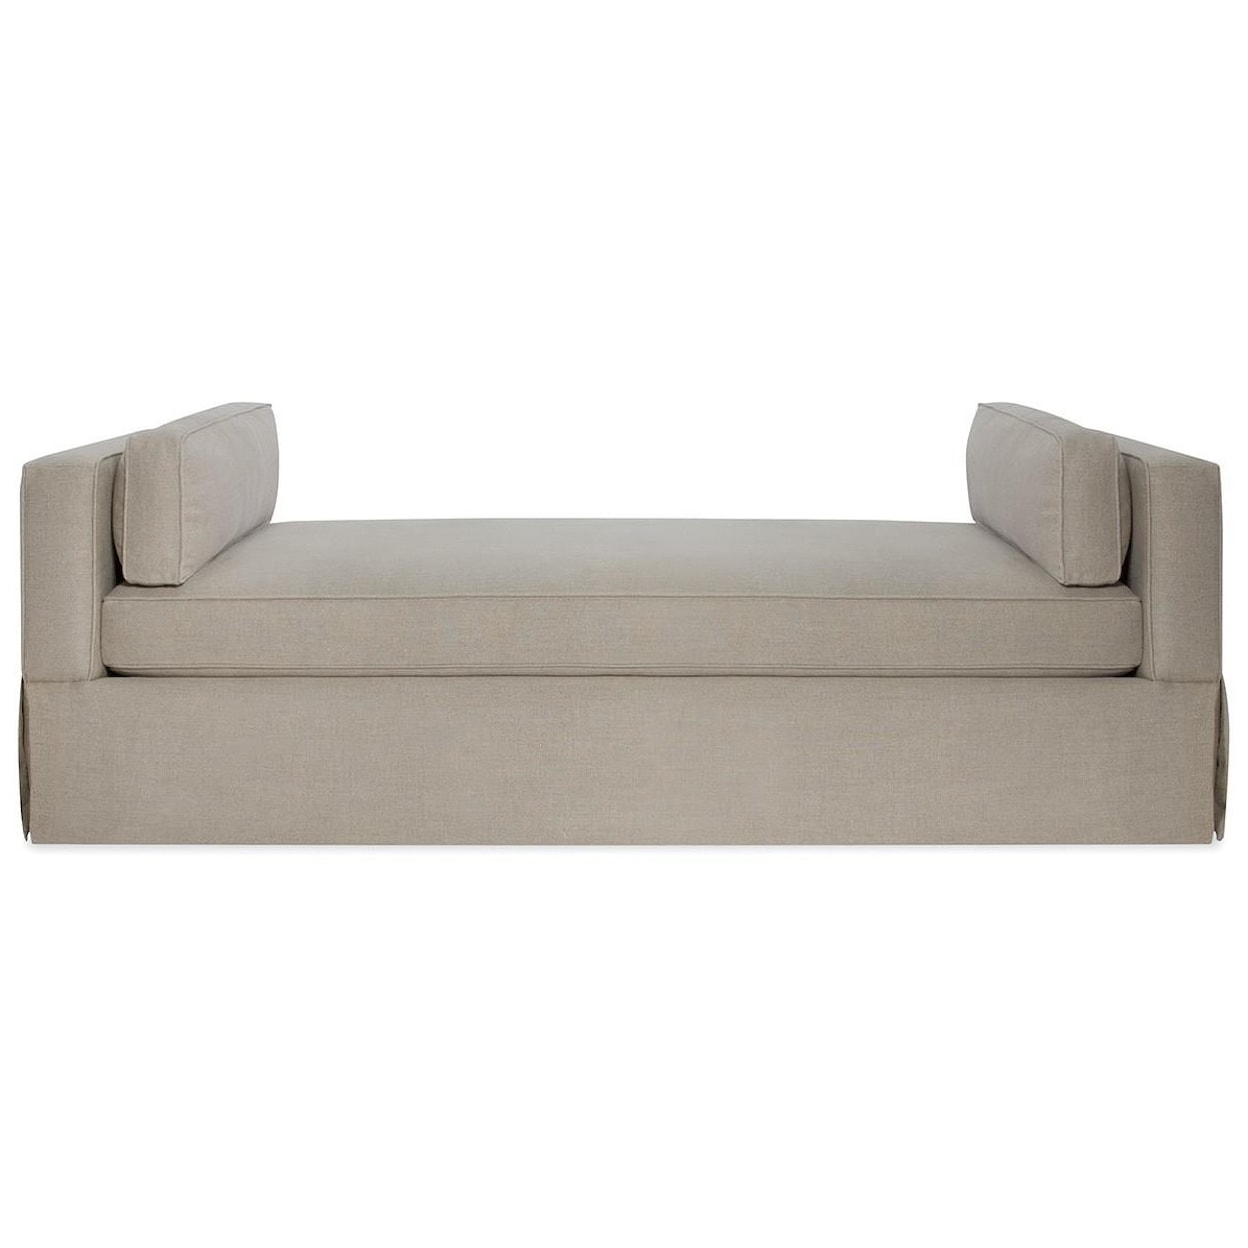 C.R. Laine Daybeds Layla Daybed